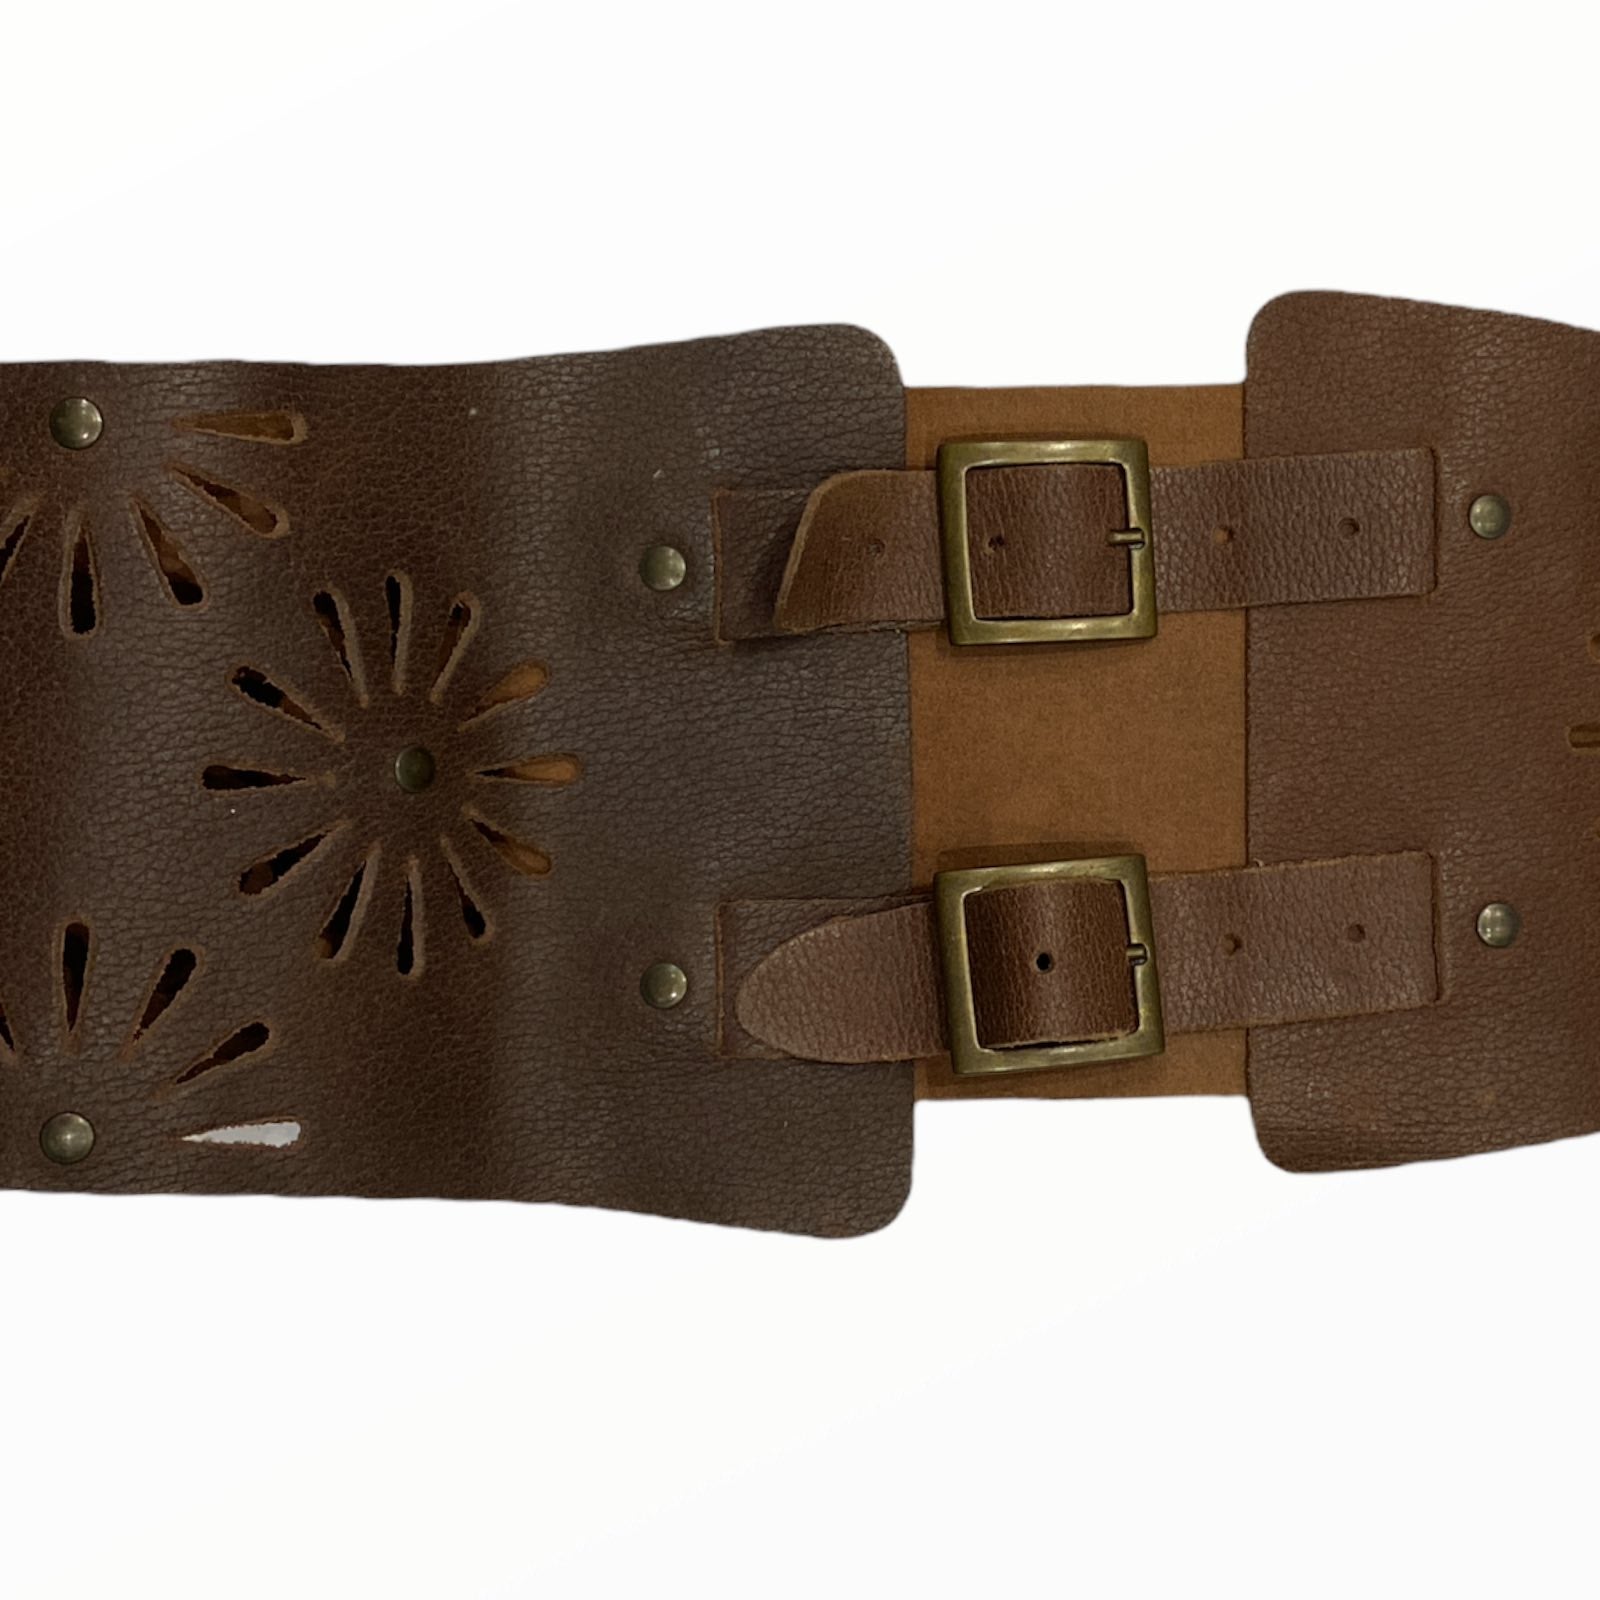 Brown leather belt with flowers